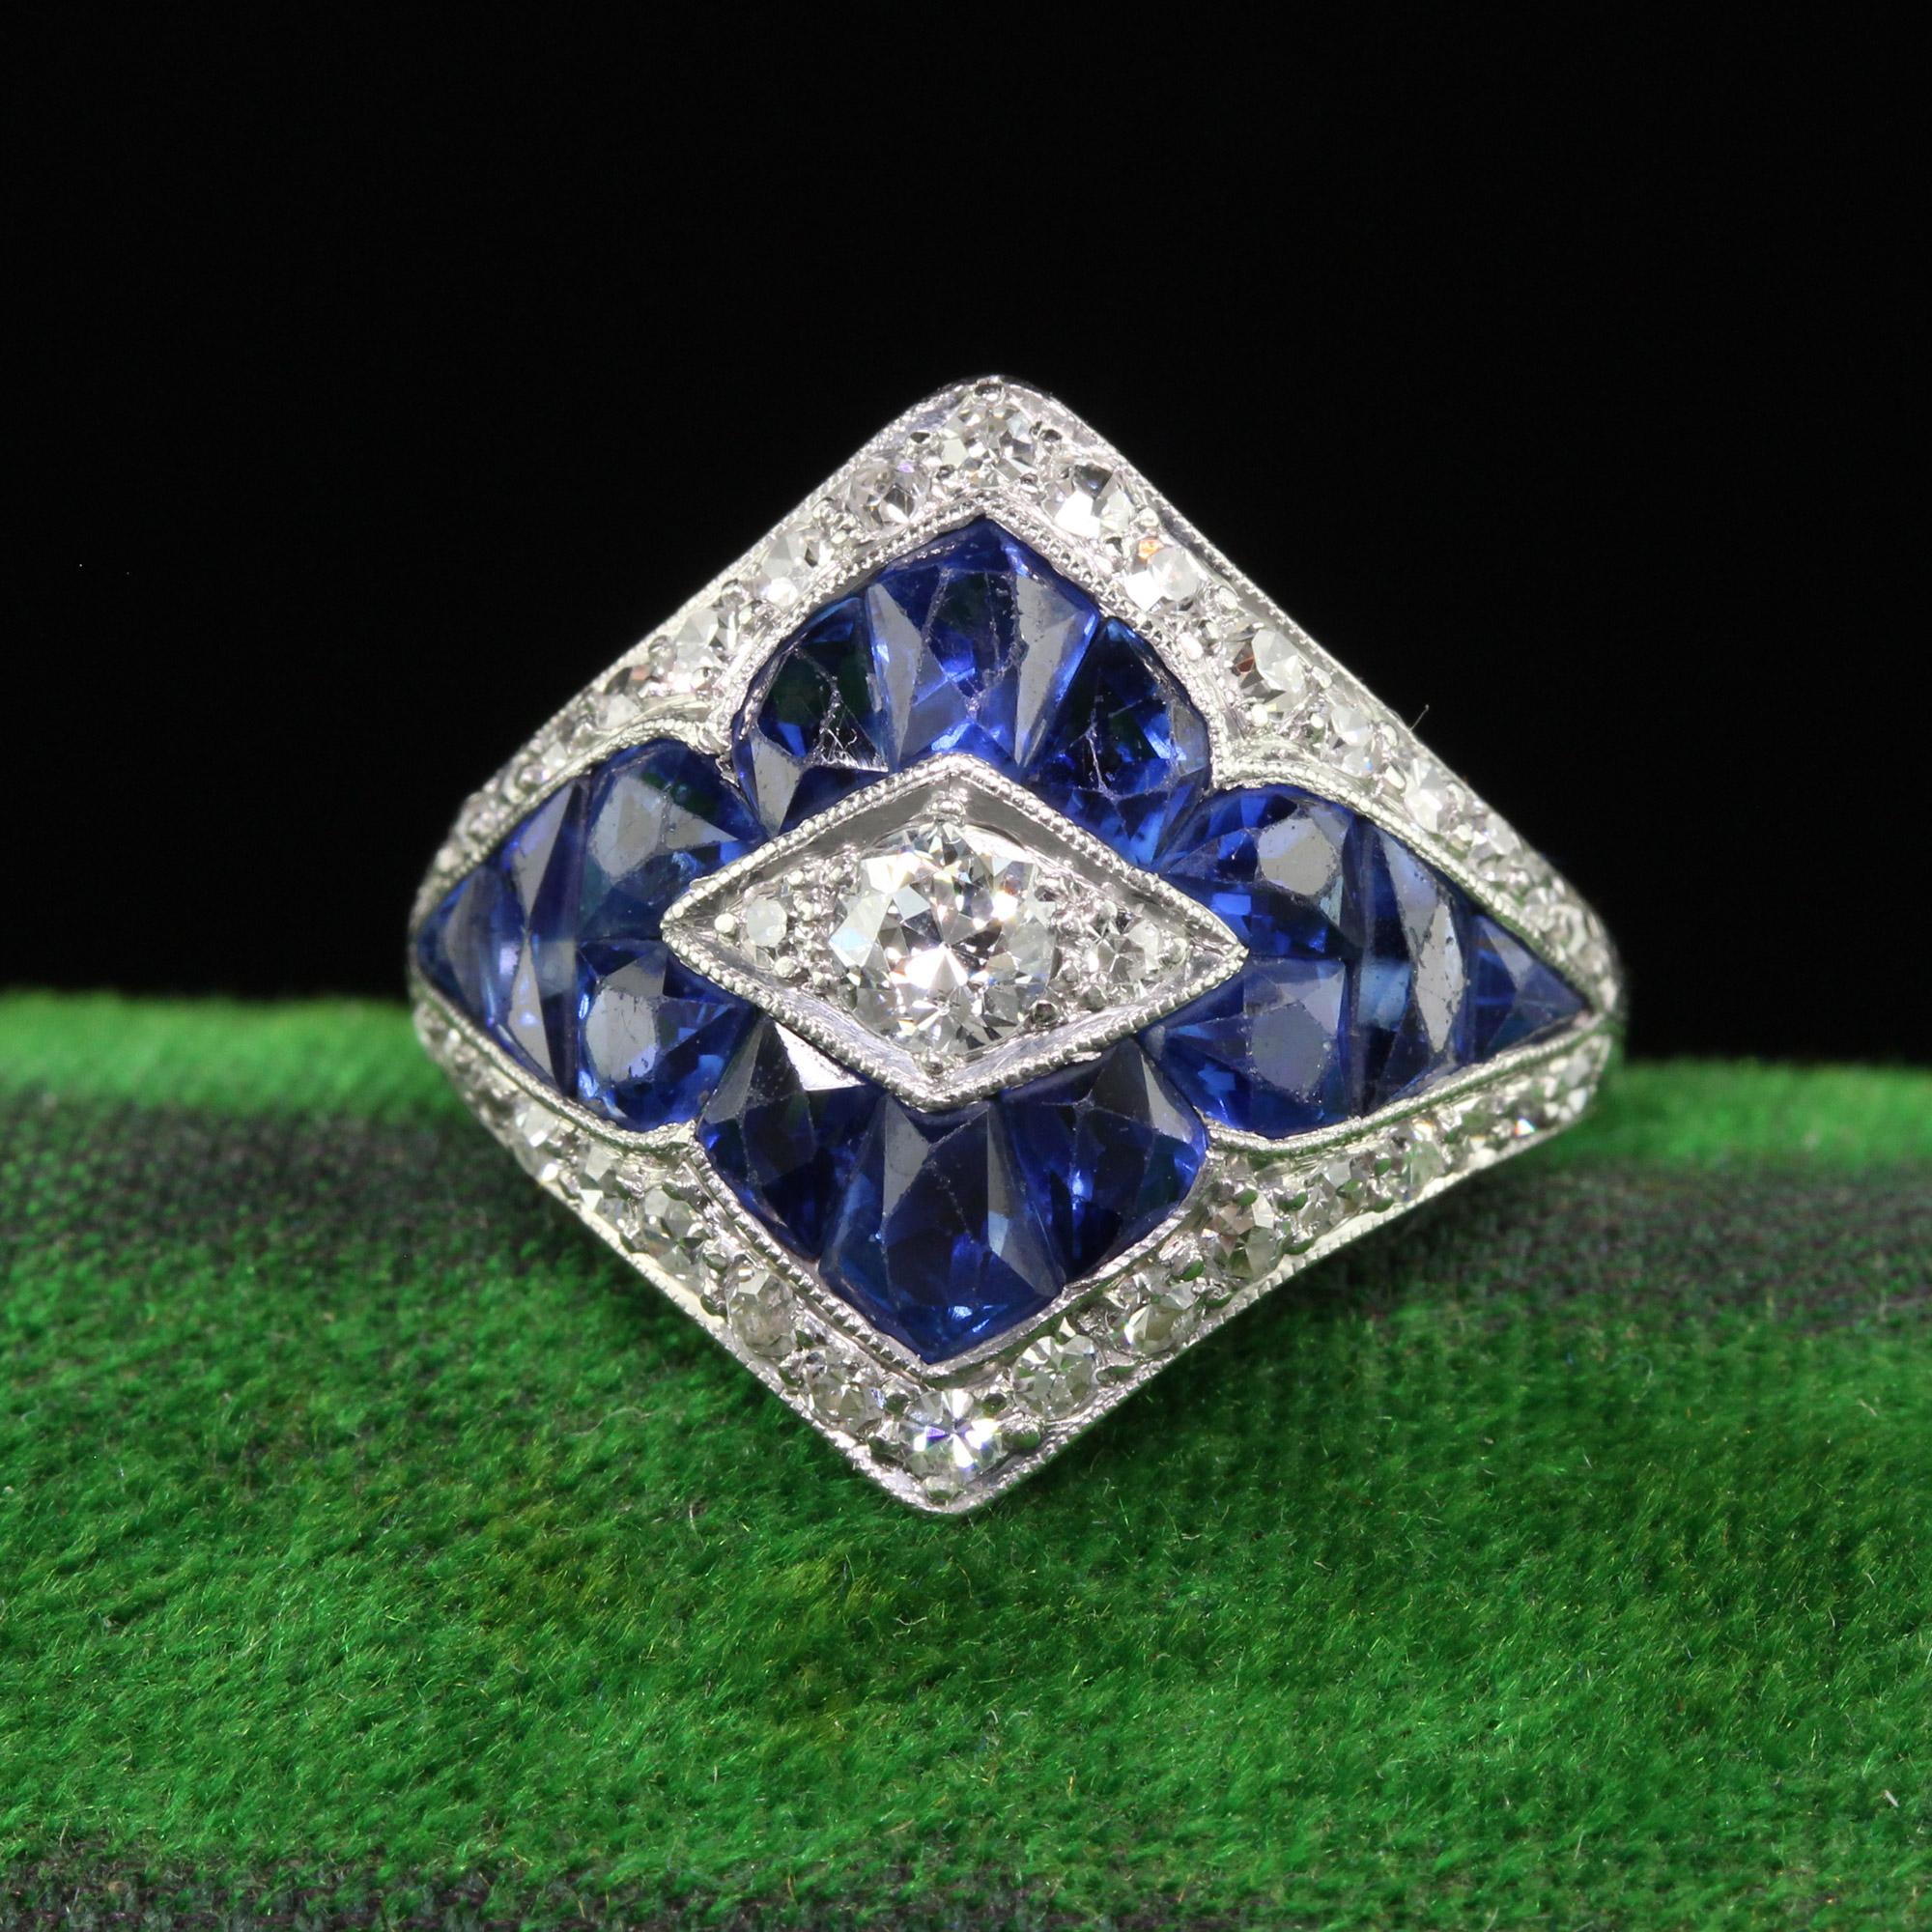 Beautiful Antique Art Deco Platinum French Cut Sapphire Old Euro Diamond Ring. This incredible Art Deco sapphire and diamond ring is crafted in platinum. The top of the ring has gorgeous old European cut and French cut sapphires set in a beautiful